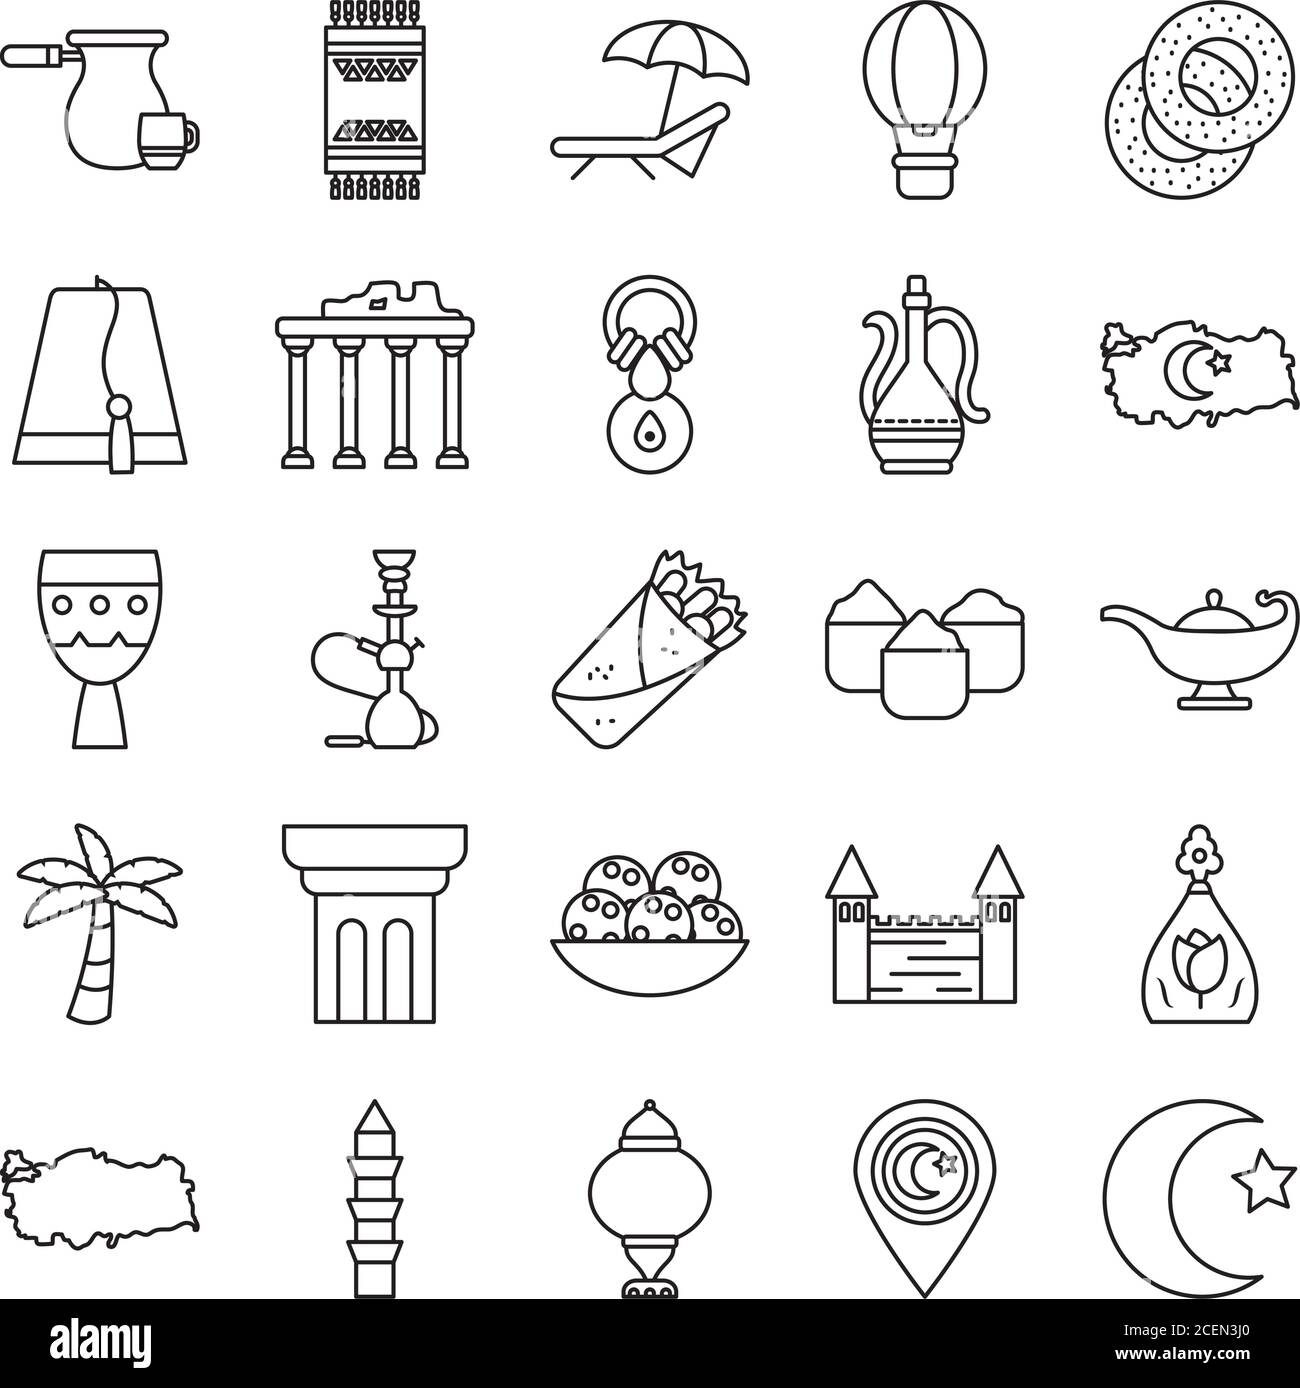 icon set of turkey country and arabian lamp over white background, line style, vector illustration Stock Vector